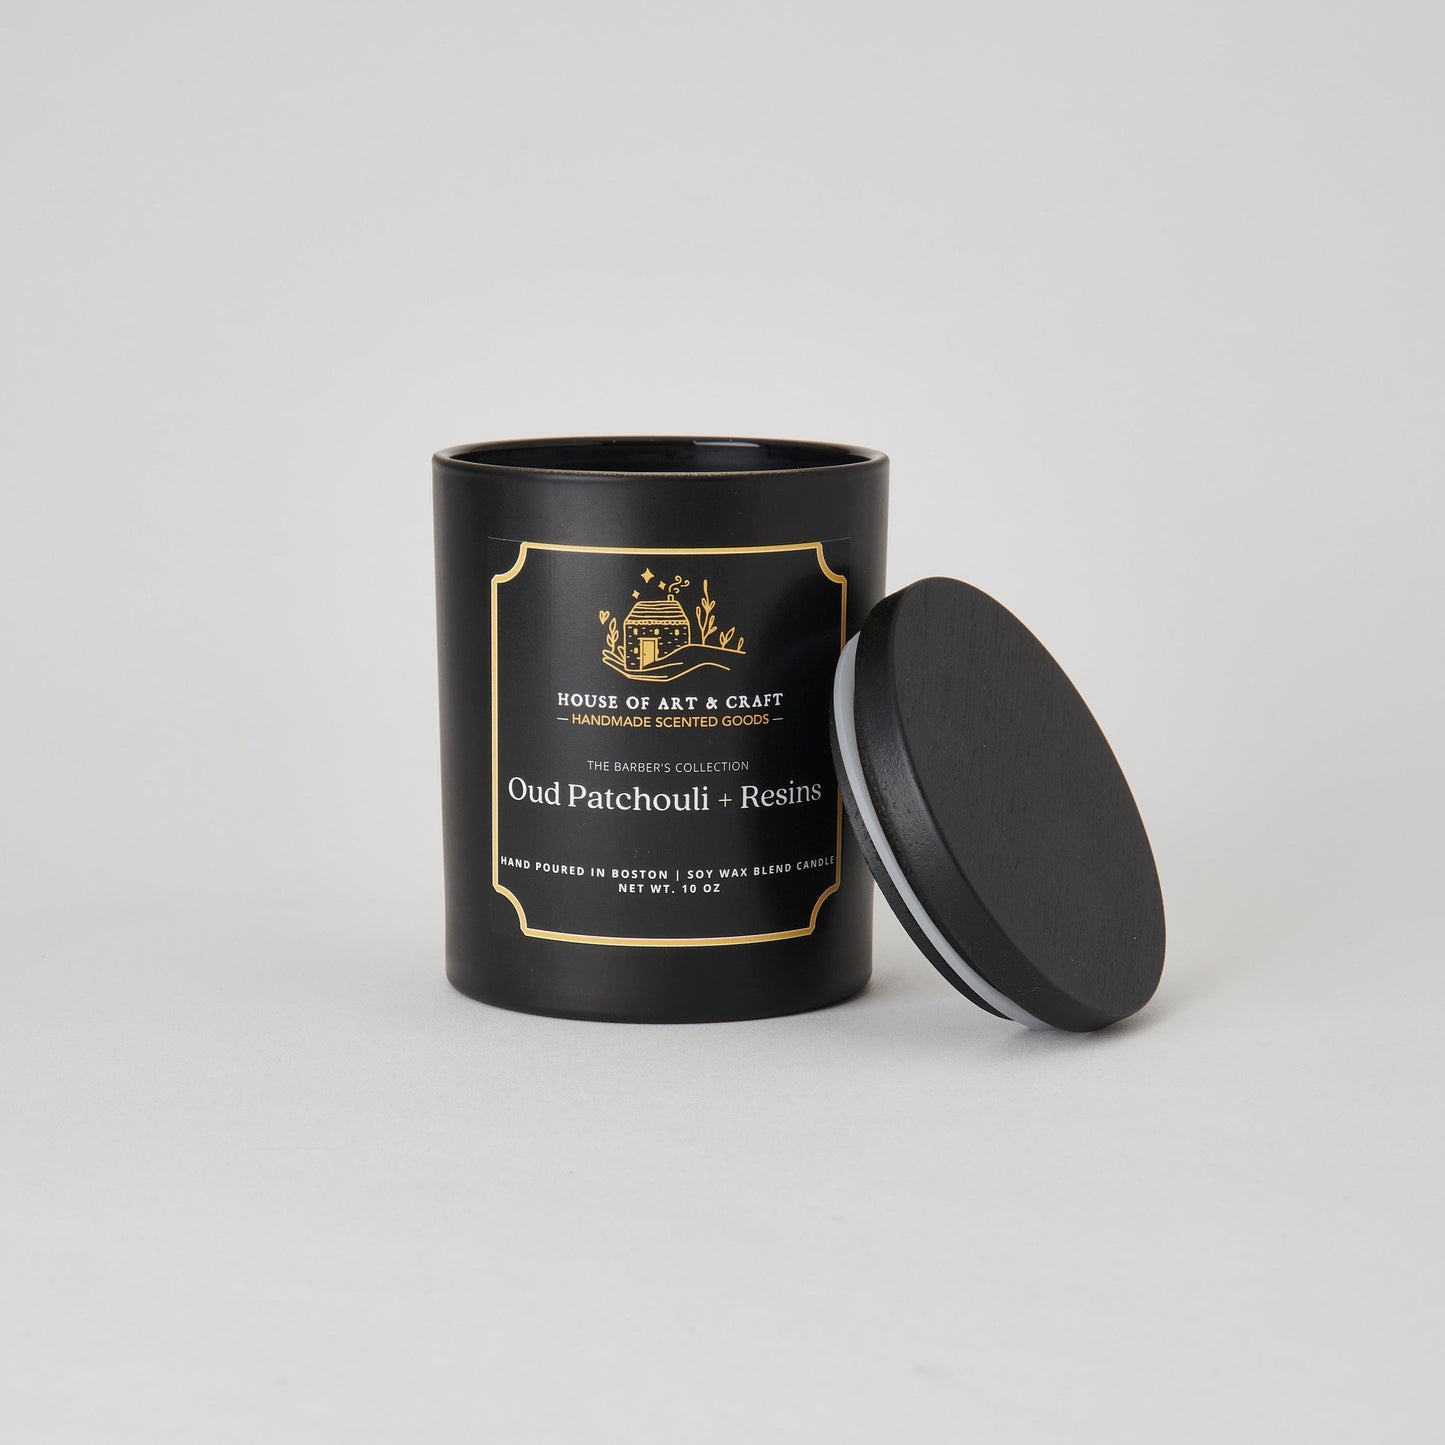 Oud Patchouli & Resins Candle | The Barber's Collection